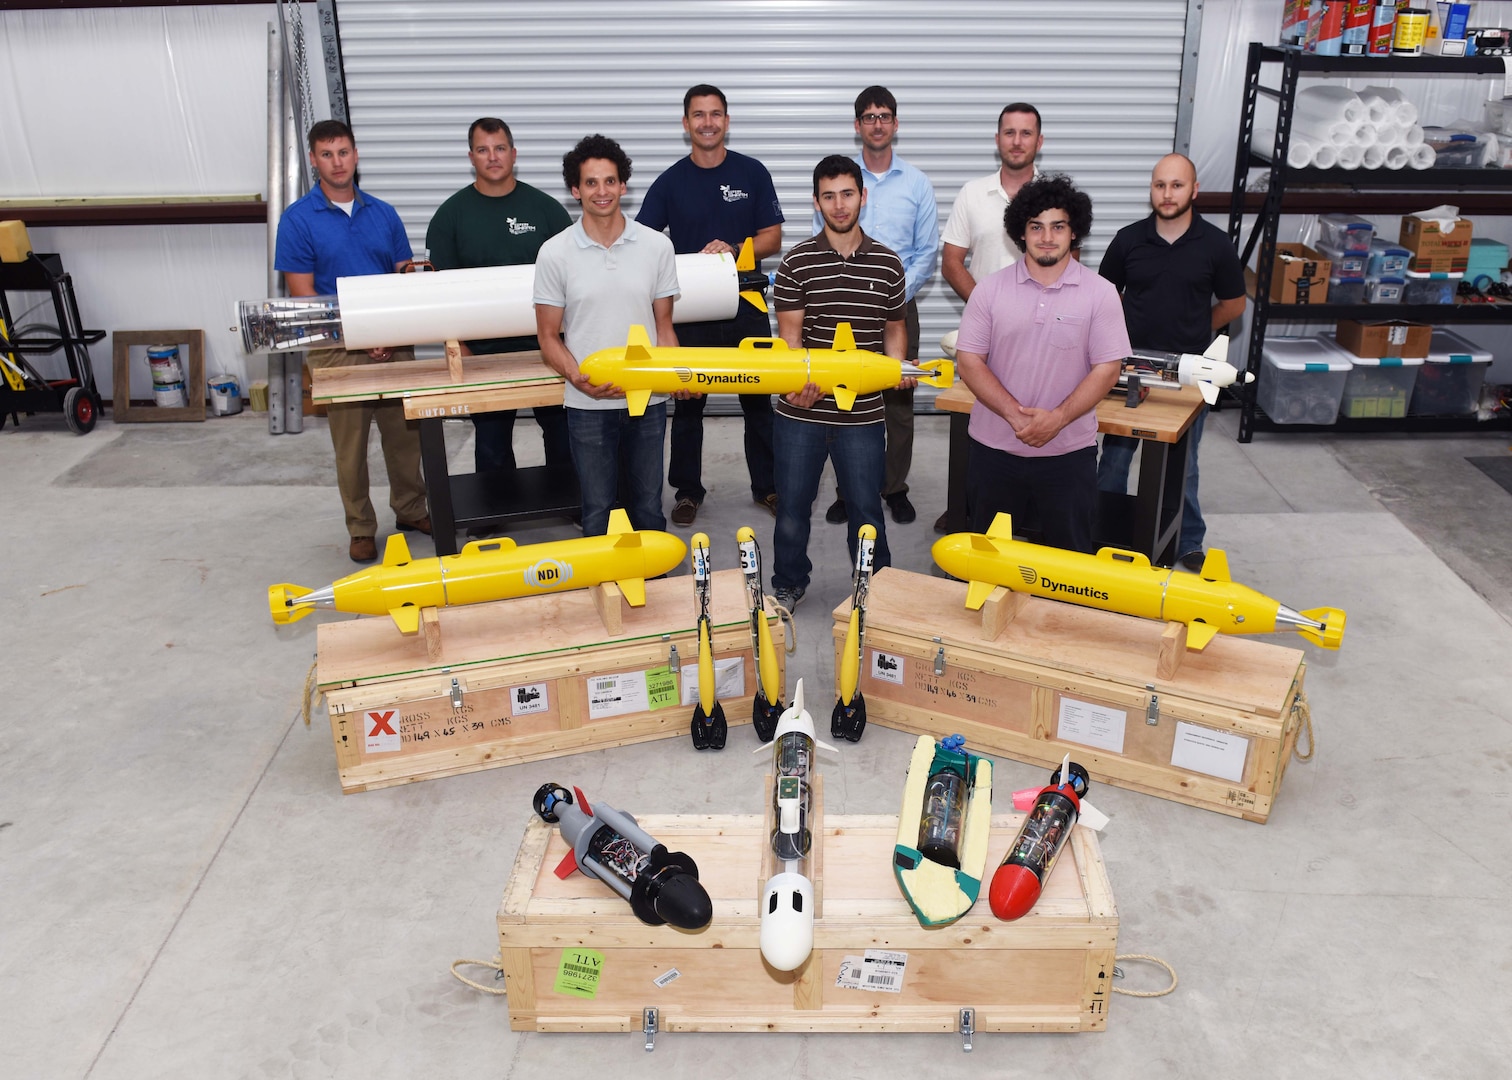 Lead scientists and engineers from Naval Sea Systems Command Warfare Center Divisions pose for a photo as a representation of a collaborative and innovative effort in development of modular, inexpensive unmanned systems collectively known as the “microSwarm Family of Systems,” or “µFOS."